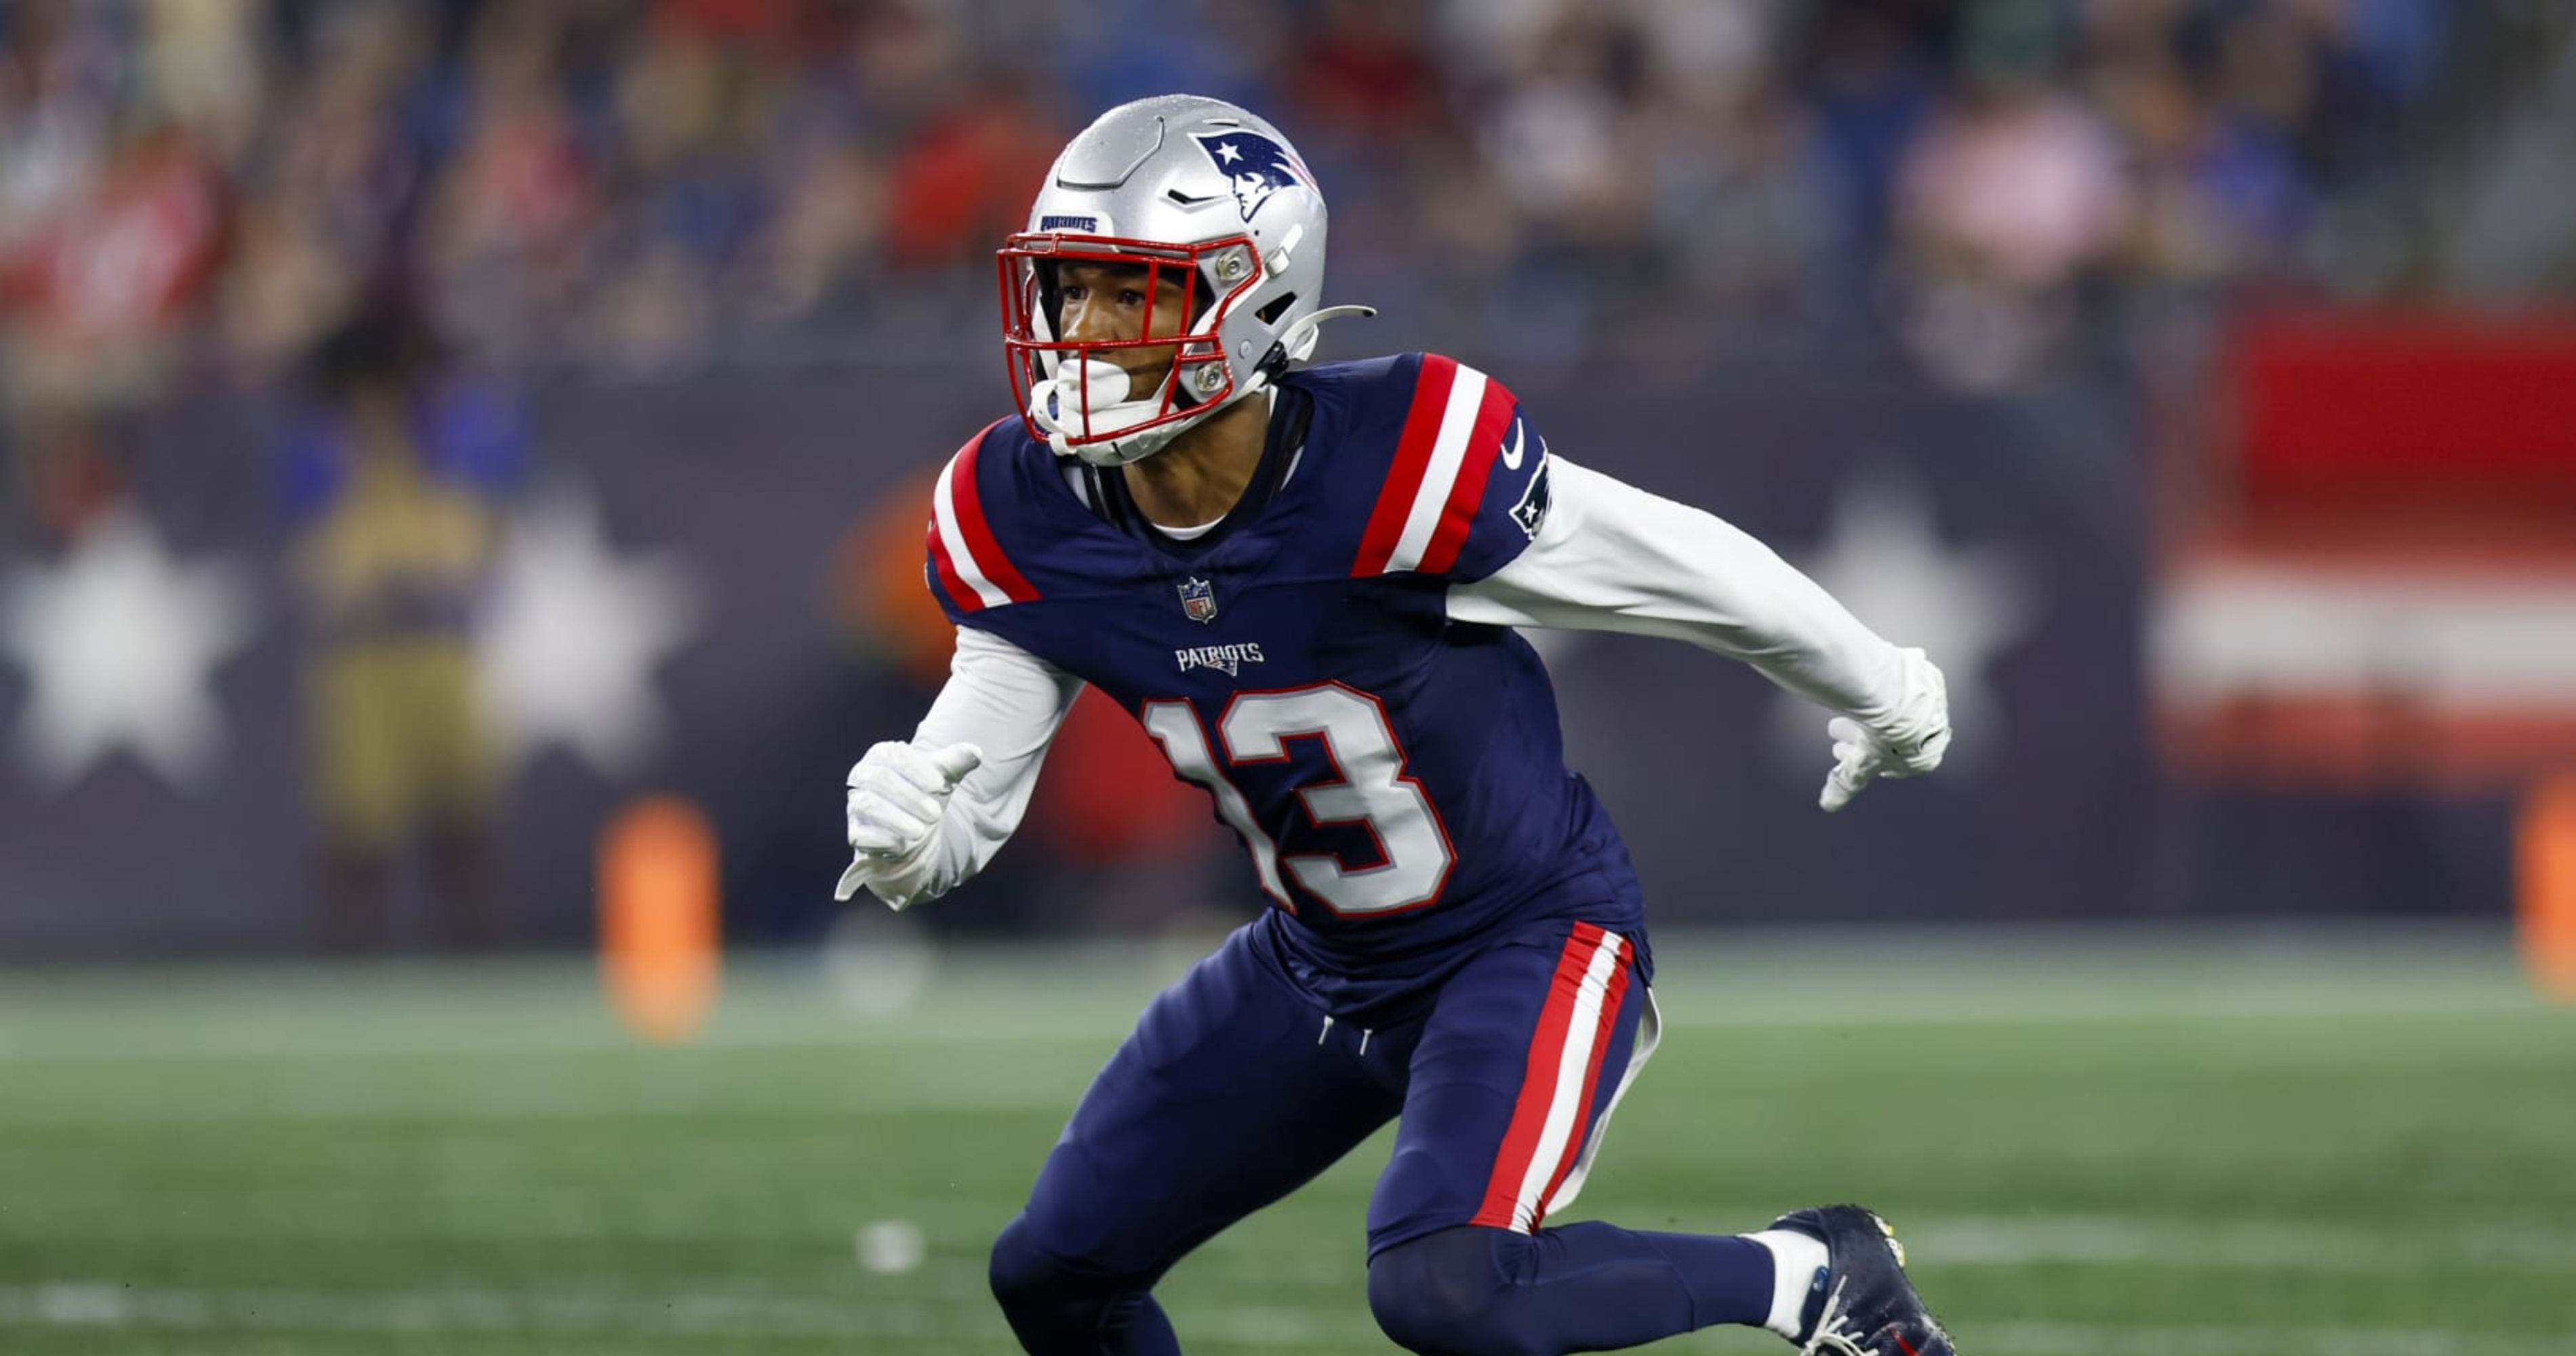 Patriots' Jack Jones Placed on IR with Hamstring Injury, Will Miss at Least 4 Games